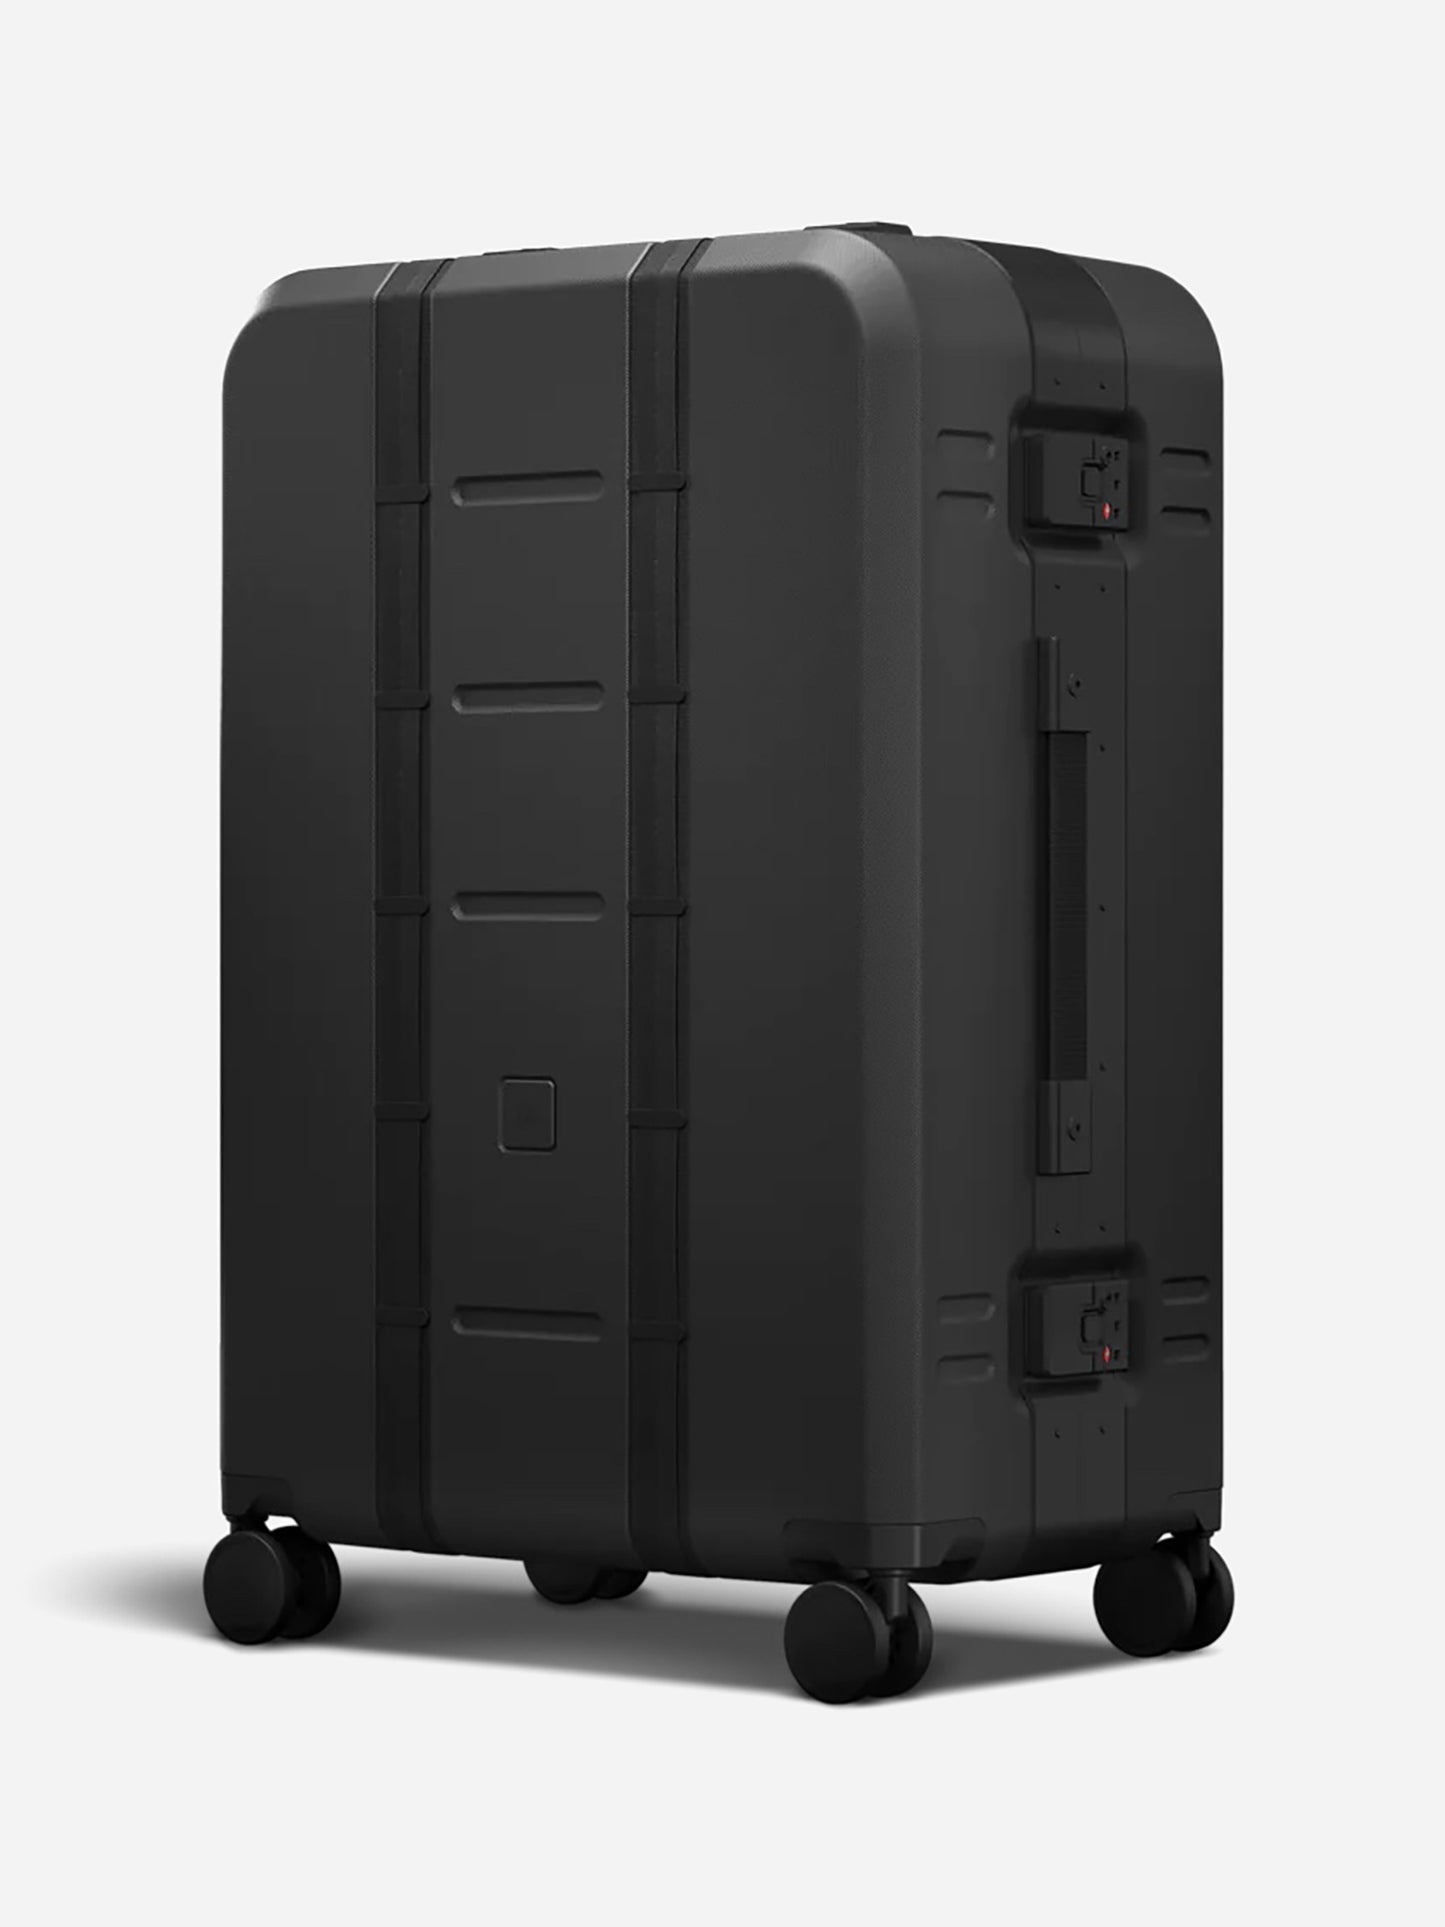 DB Journey Ramverk Pro Large Check-In Luggage